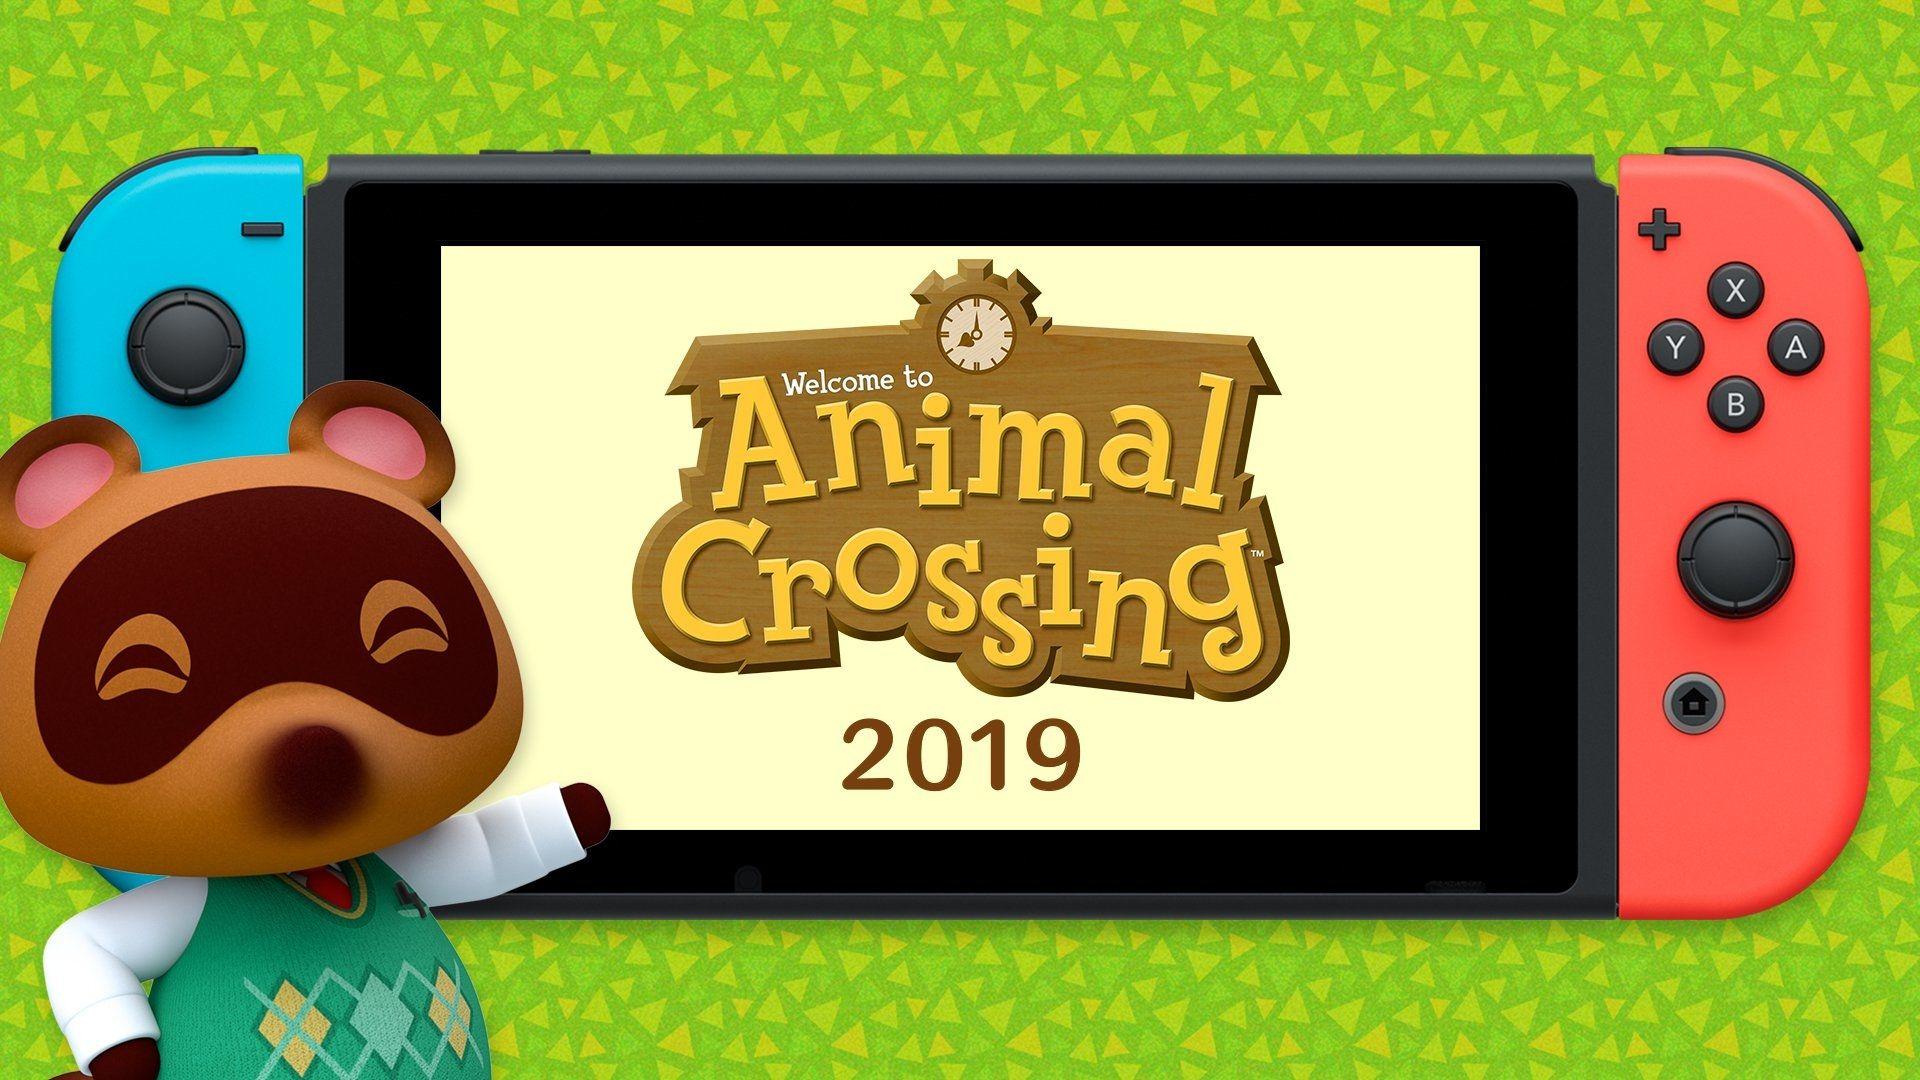 Yes, 'Animal Crossing' is coming to the Nintendo Switch